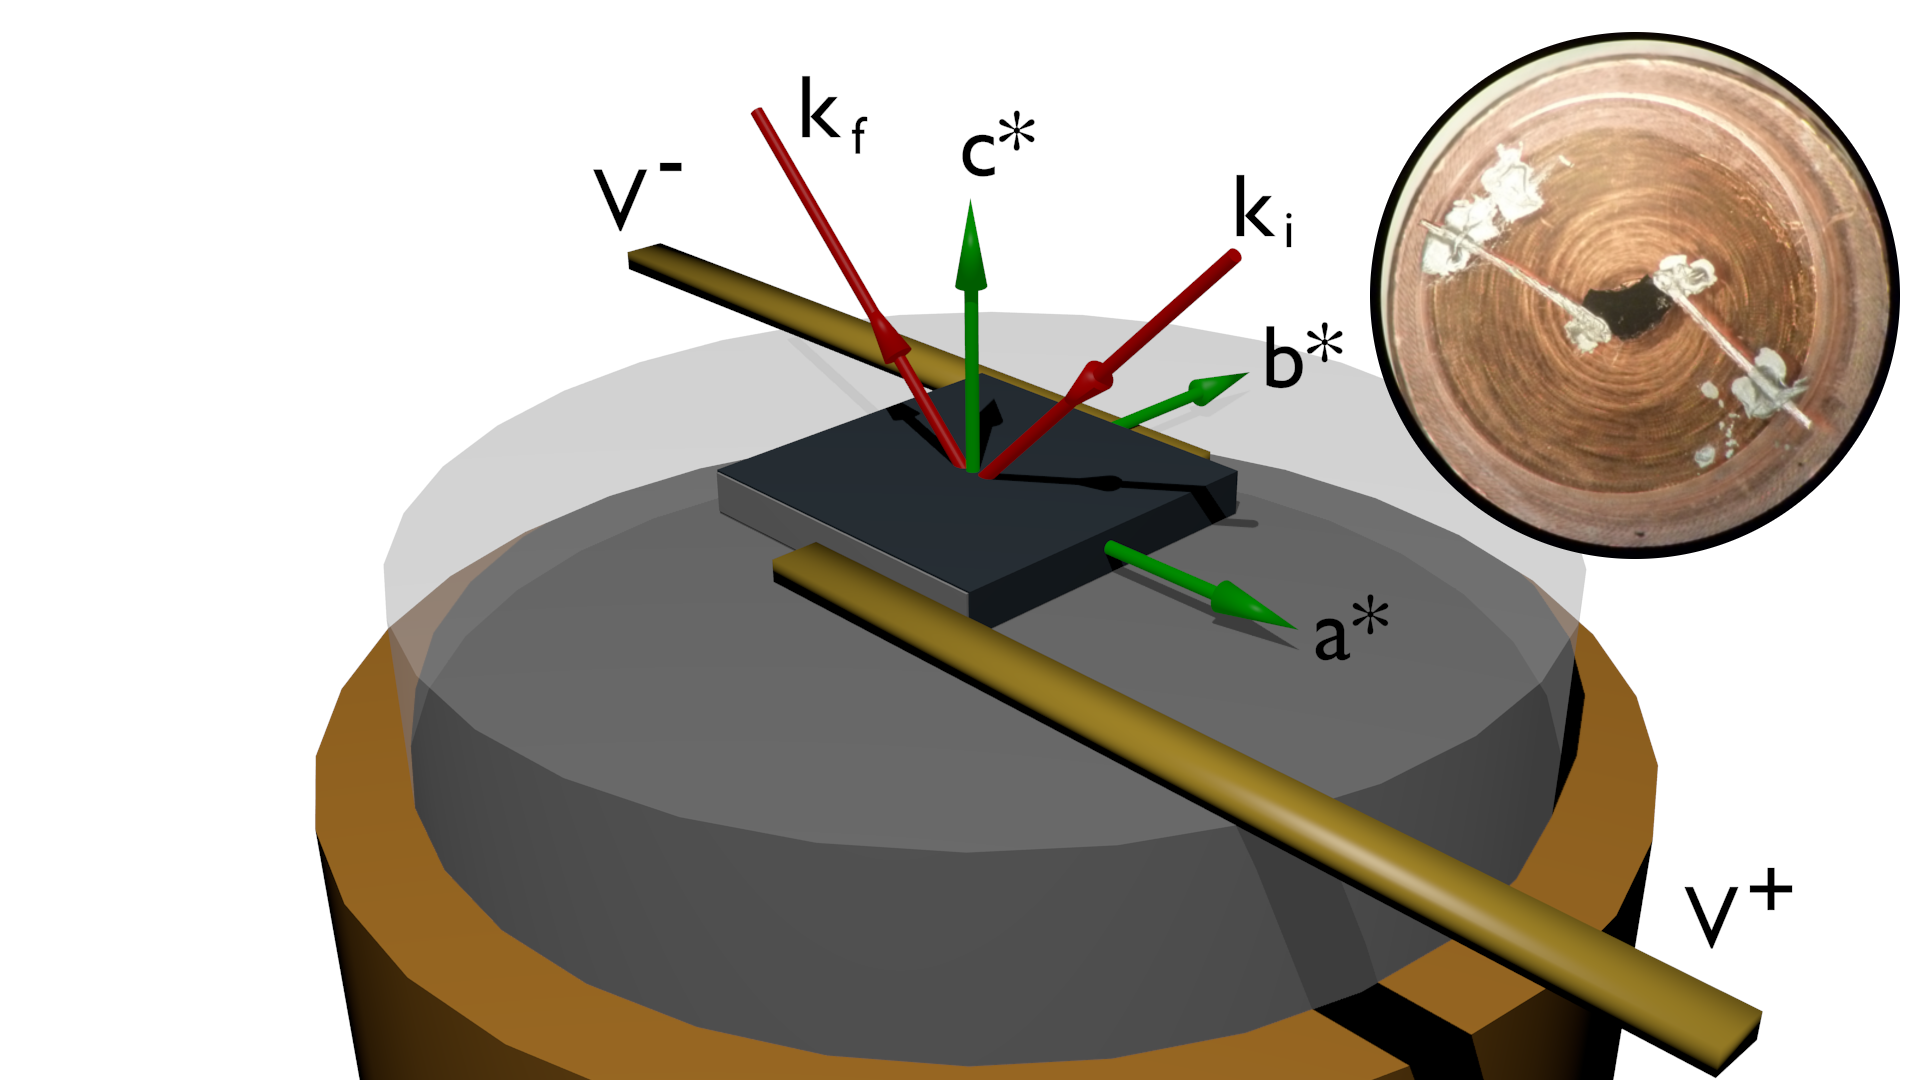 Illustration of electrical leads attached to a sample on the I16 cryostat mount, with an photo of the set up inset. A sapphire window is used to insulate the base and silver paint to attach leads to the sample sides. This provides an electric field along a specific axis (in this case, along the b* axis), while measuring diffraction from the sample surface.